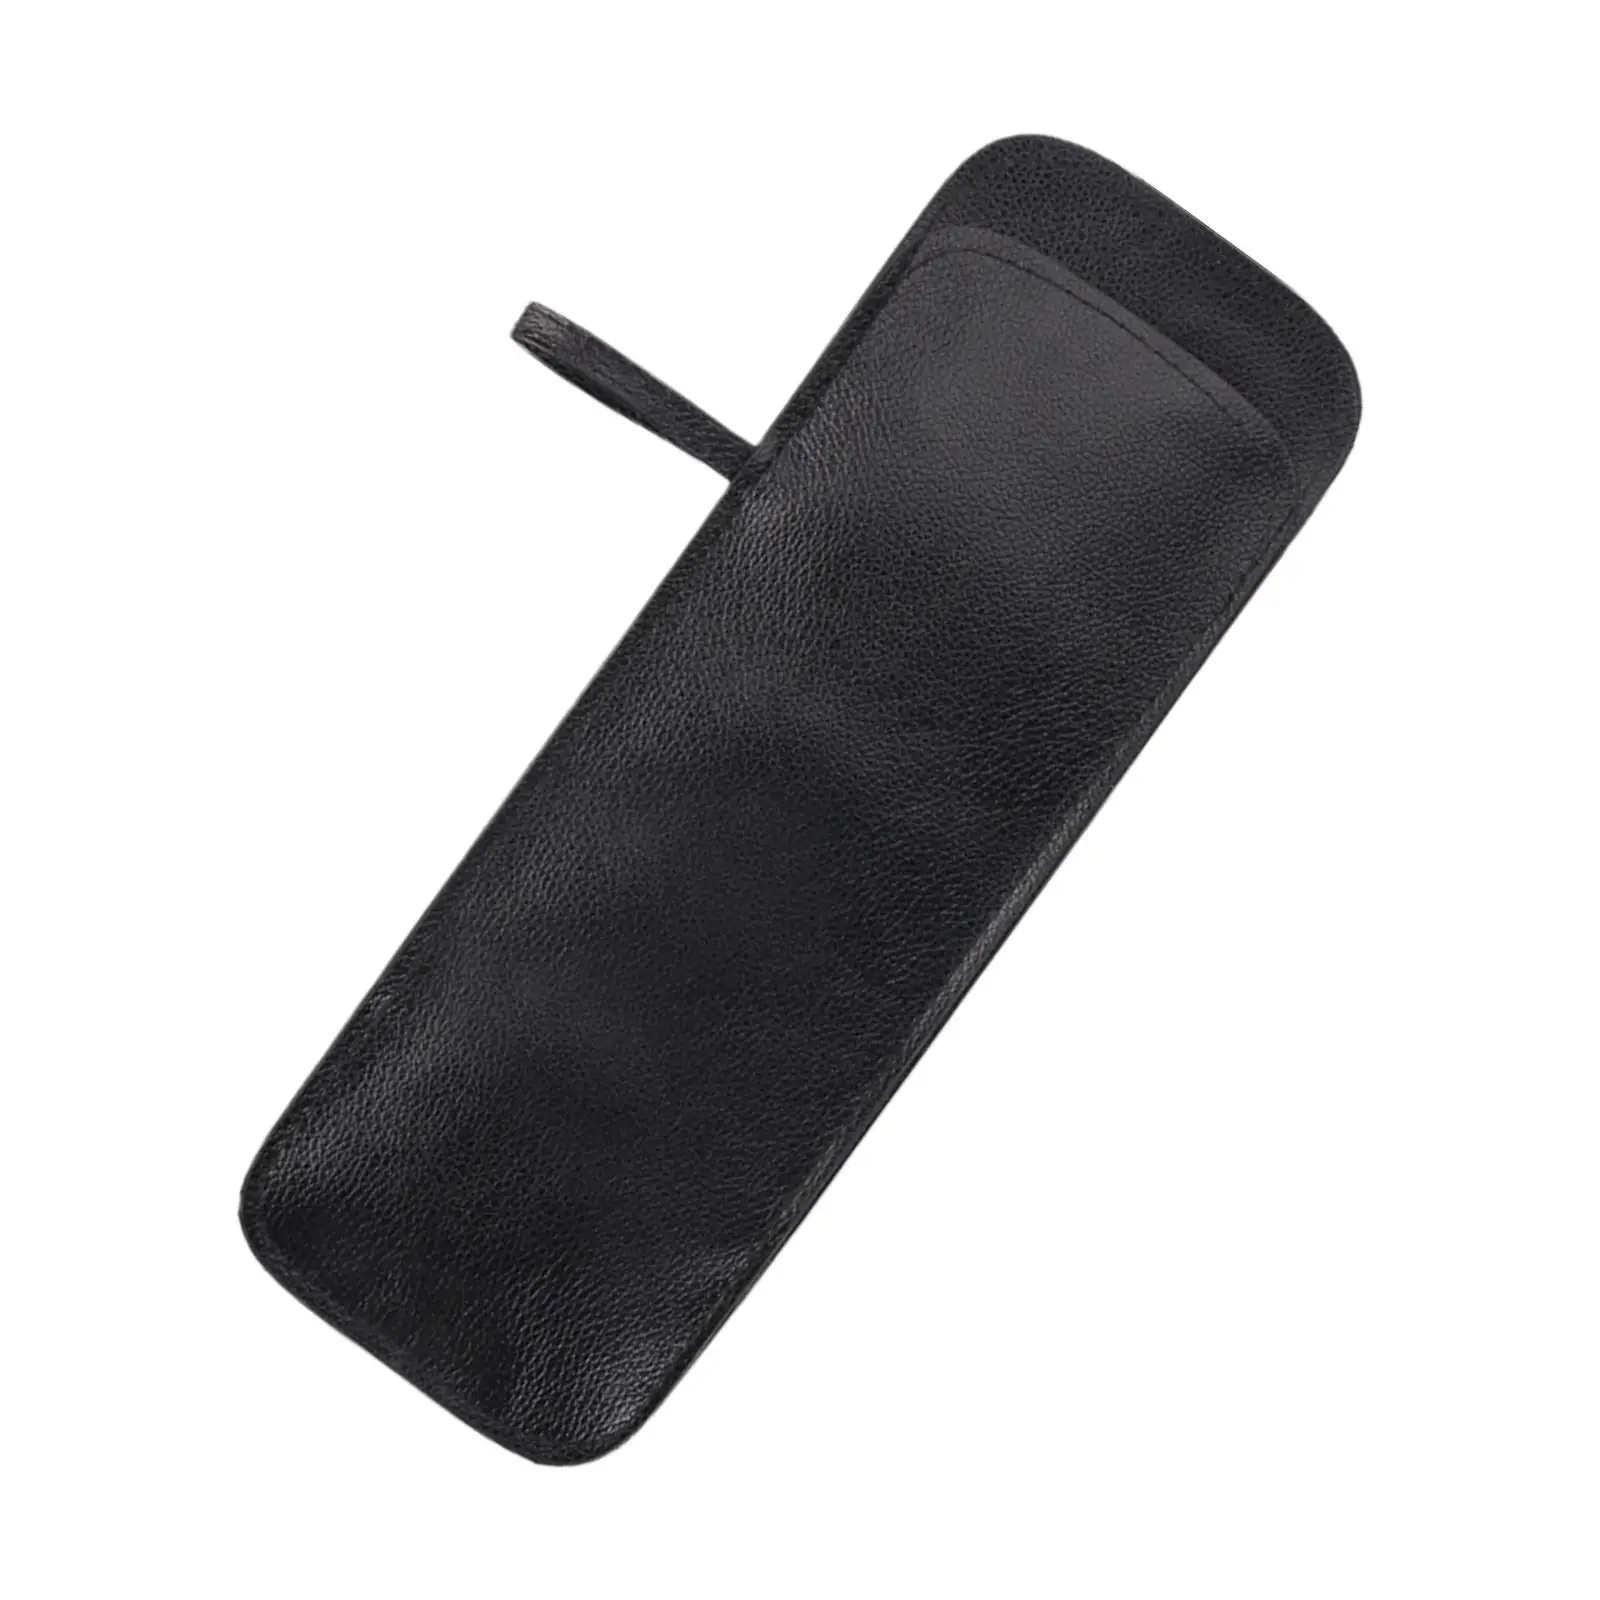 Umbrella Sleeves Covers for Wet Umbrellas Portable Umbrella Carry Bag Wet Umbrella Case Umbrella Pouches for Travel Outdoor Home